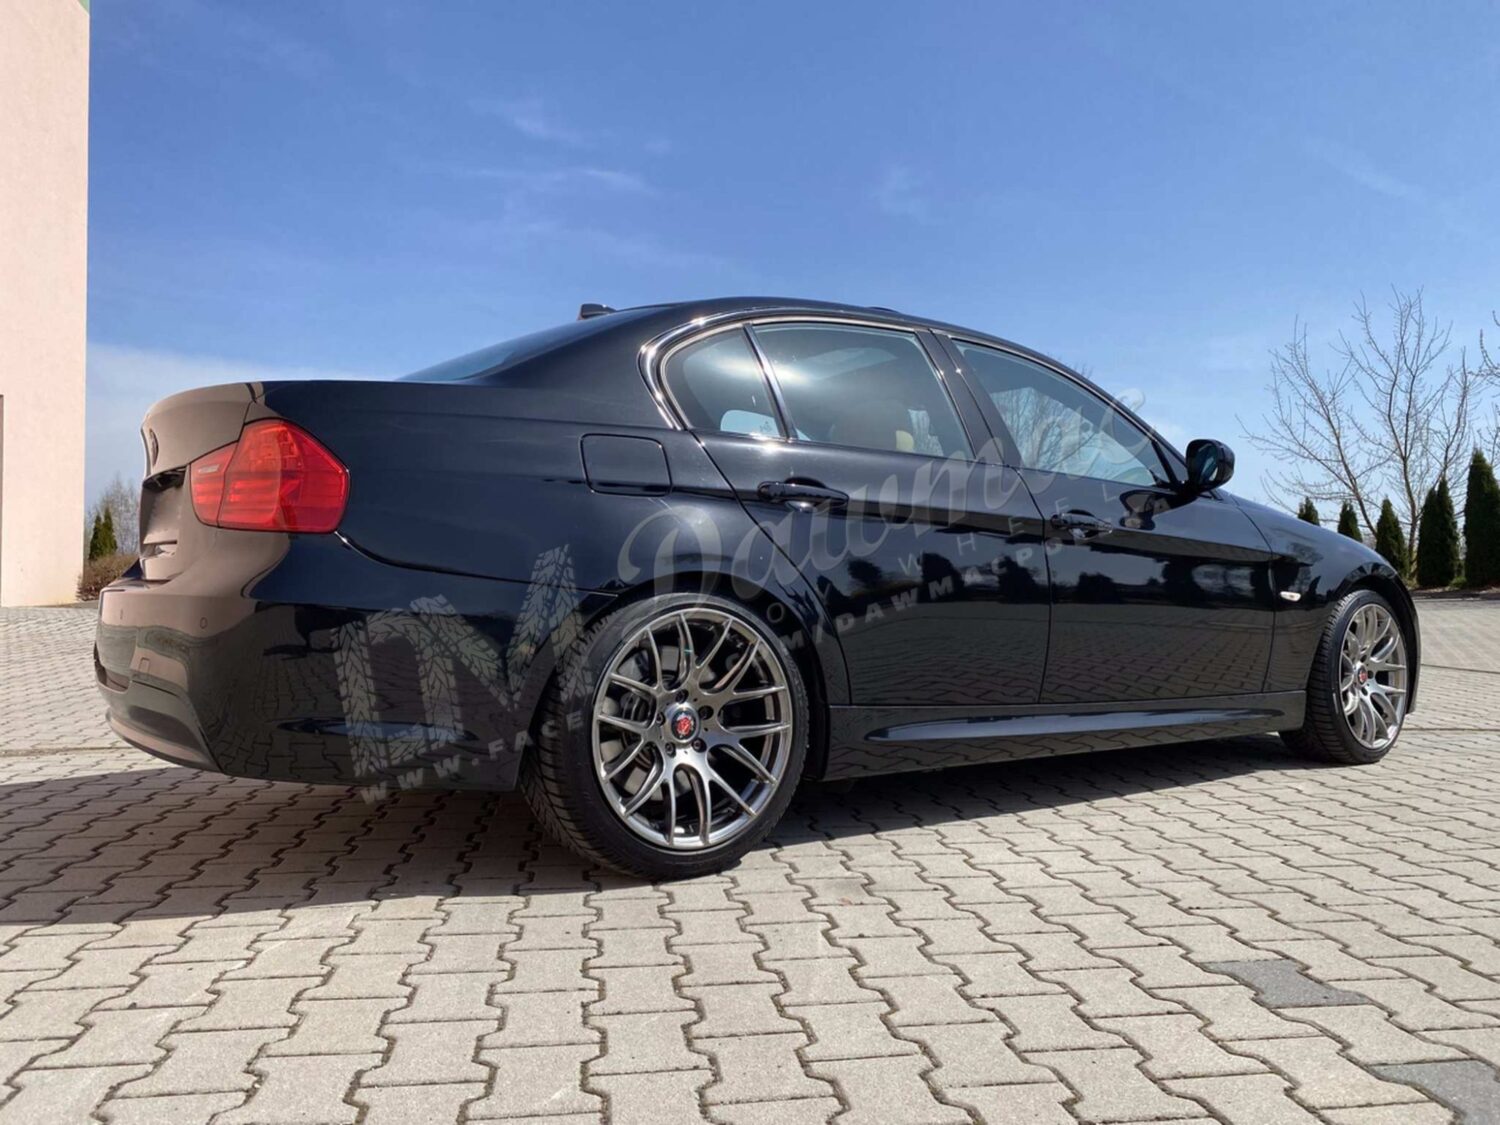 BMW 3 series E9X with 18×8.5 and 18×9.5-inch Axe CS
